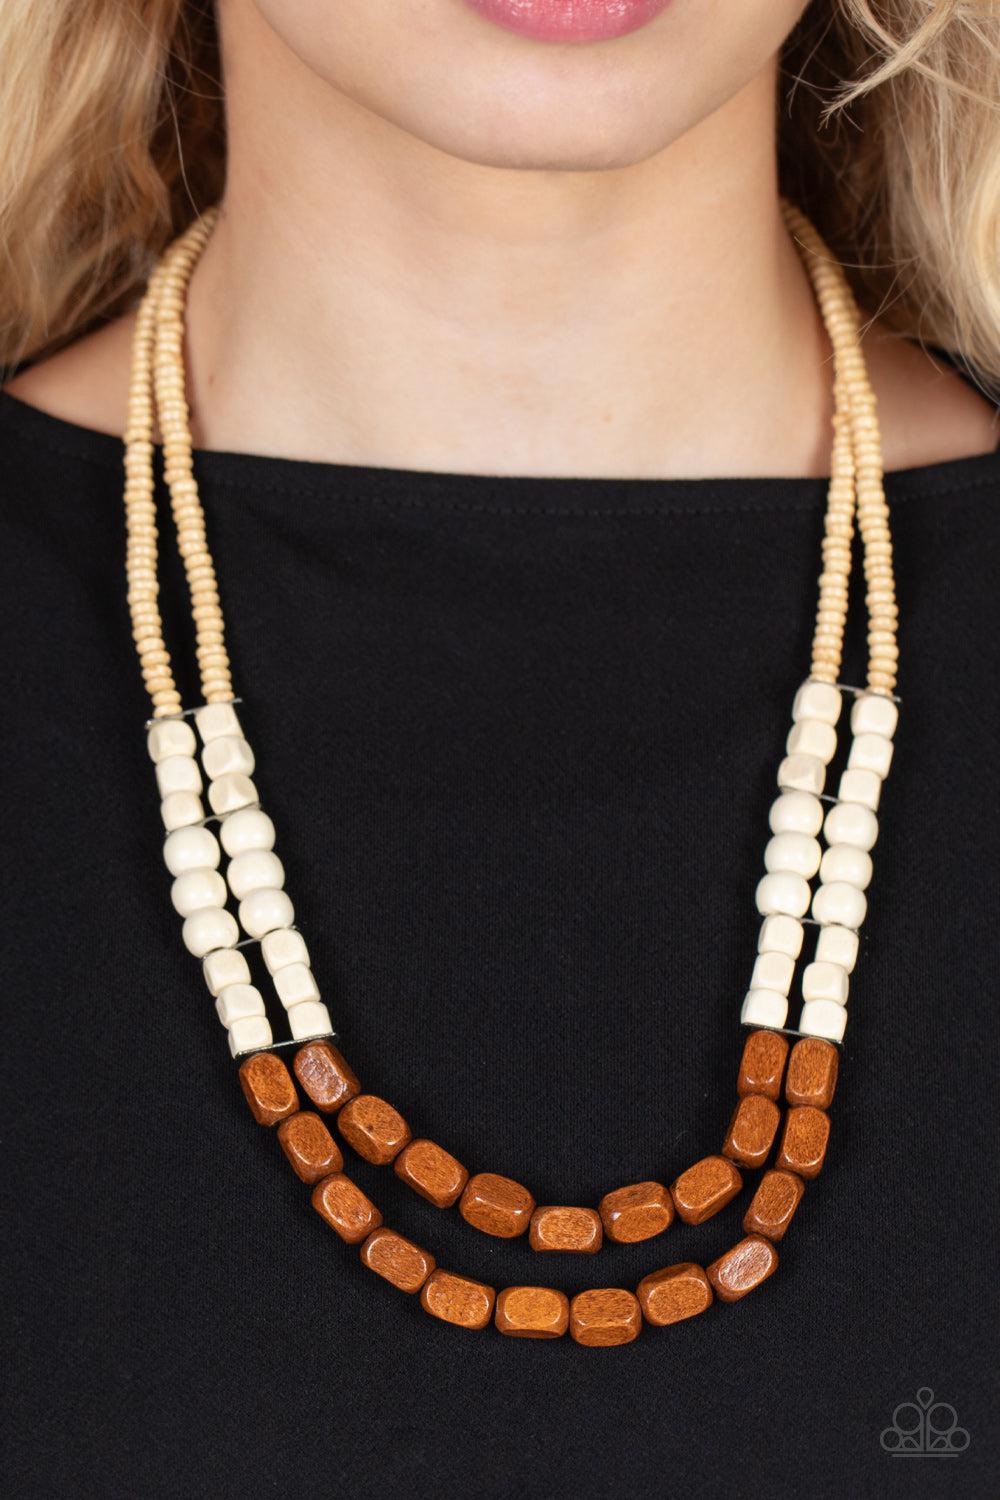 Bermuda Bellhop Brown &amp; White Wood Necklace - Paparazzi Accessories-on model - CarasShop.com - $5 Jewelry by Cara Jewels